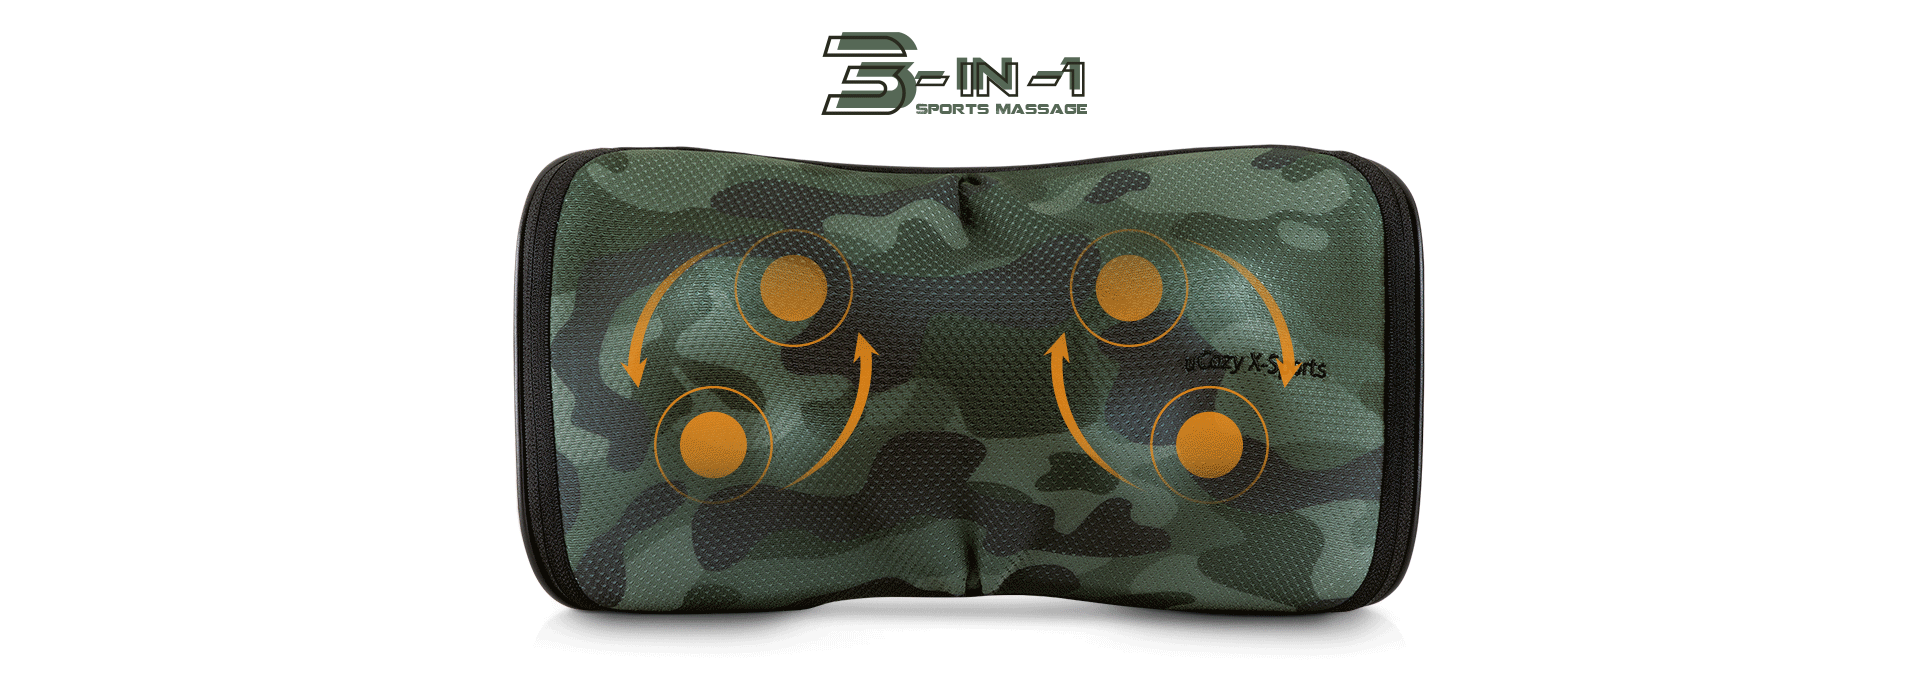 3-in-1 Sports Massager